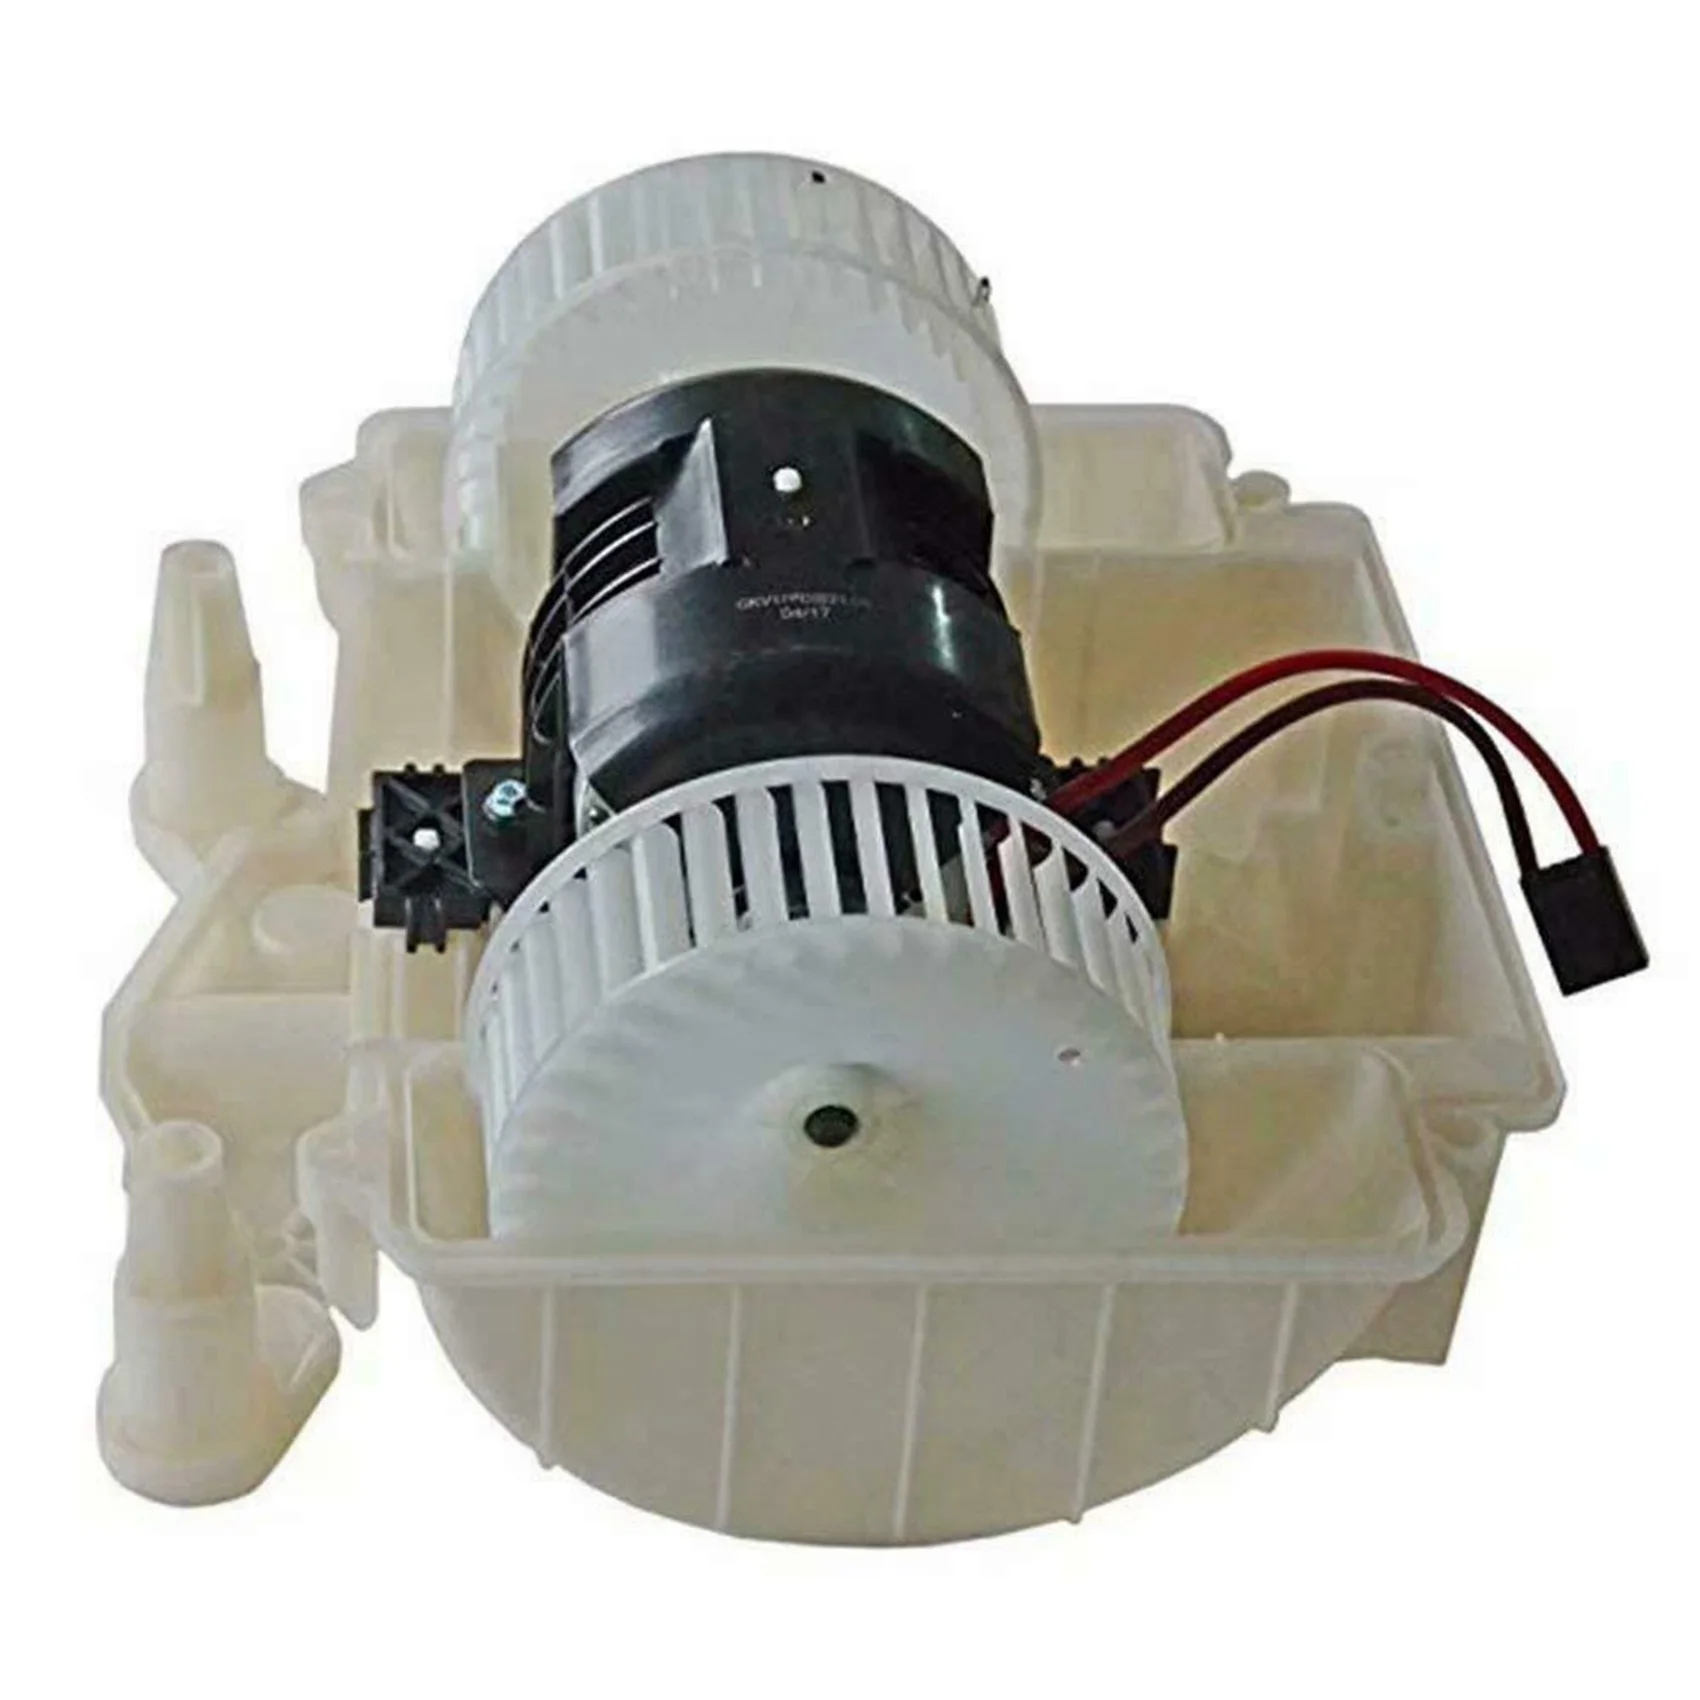 

Heater Blower Motor 2218202714 for Mercedes Benz W221 C216 S550 S600 CL550 CL600 A/C Blower